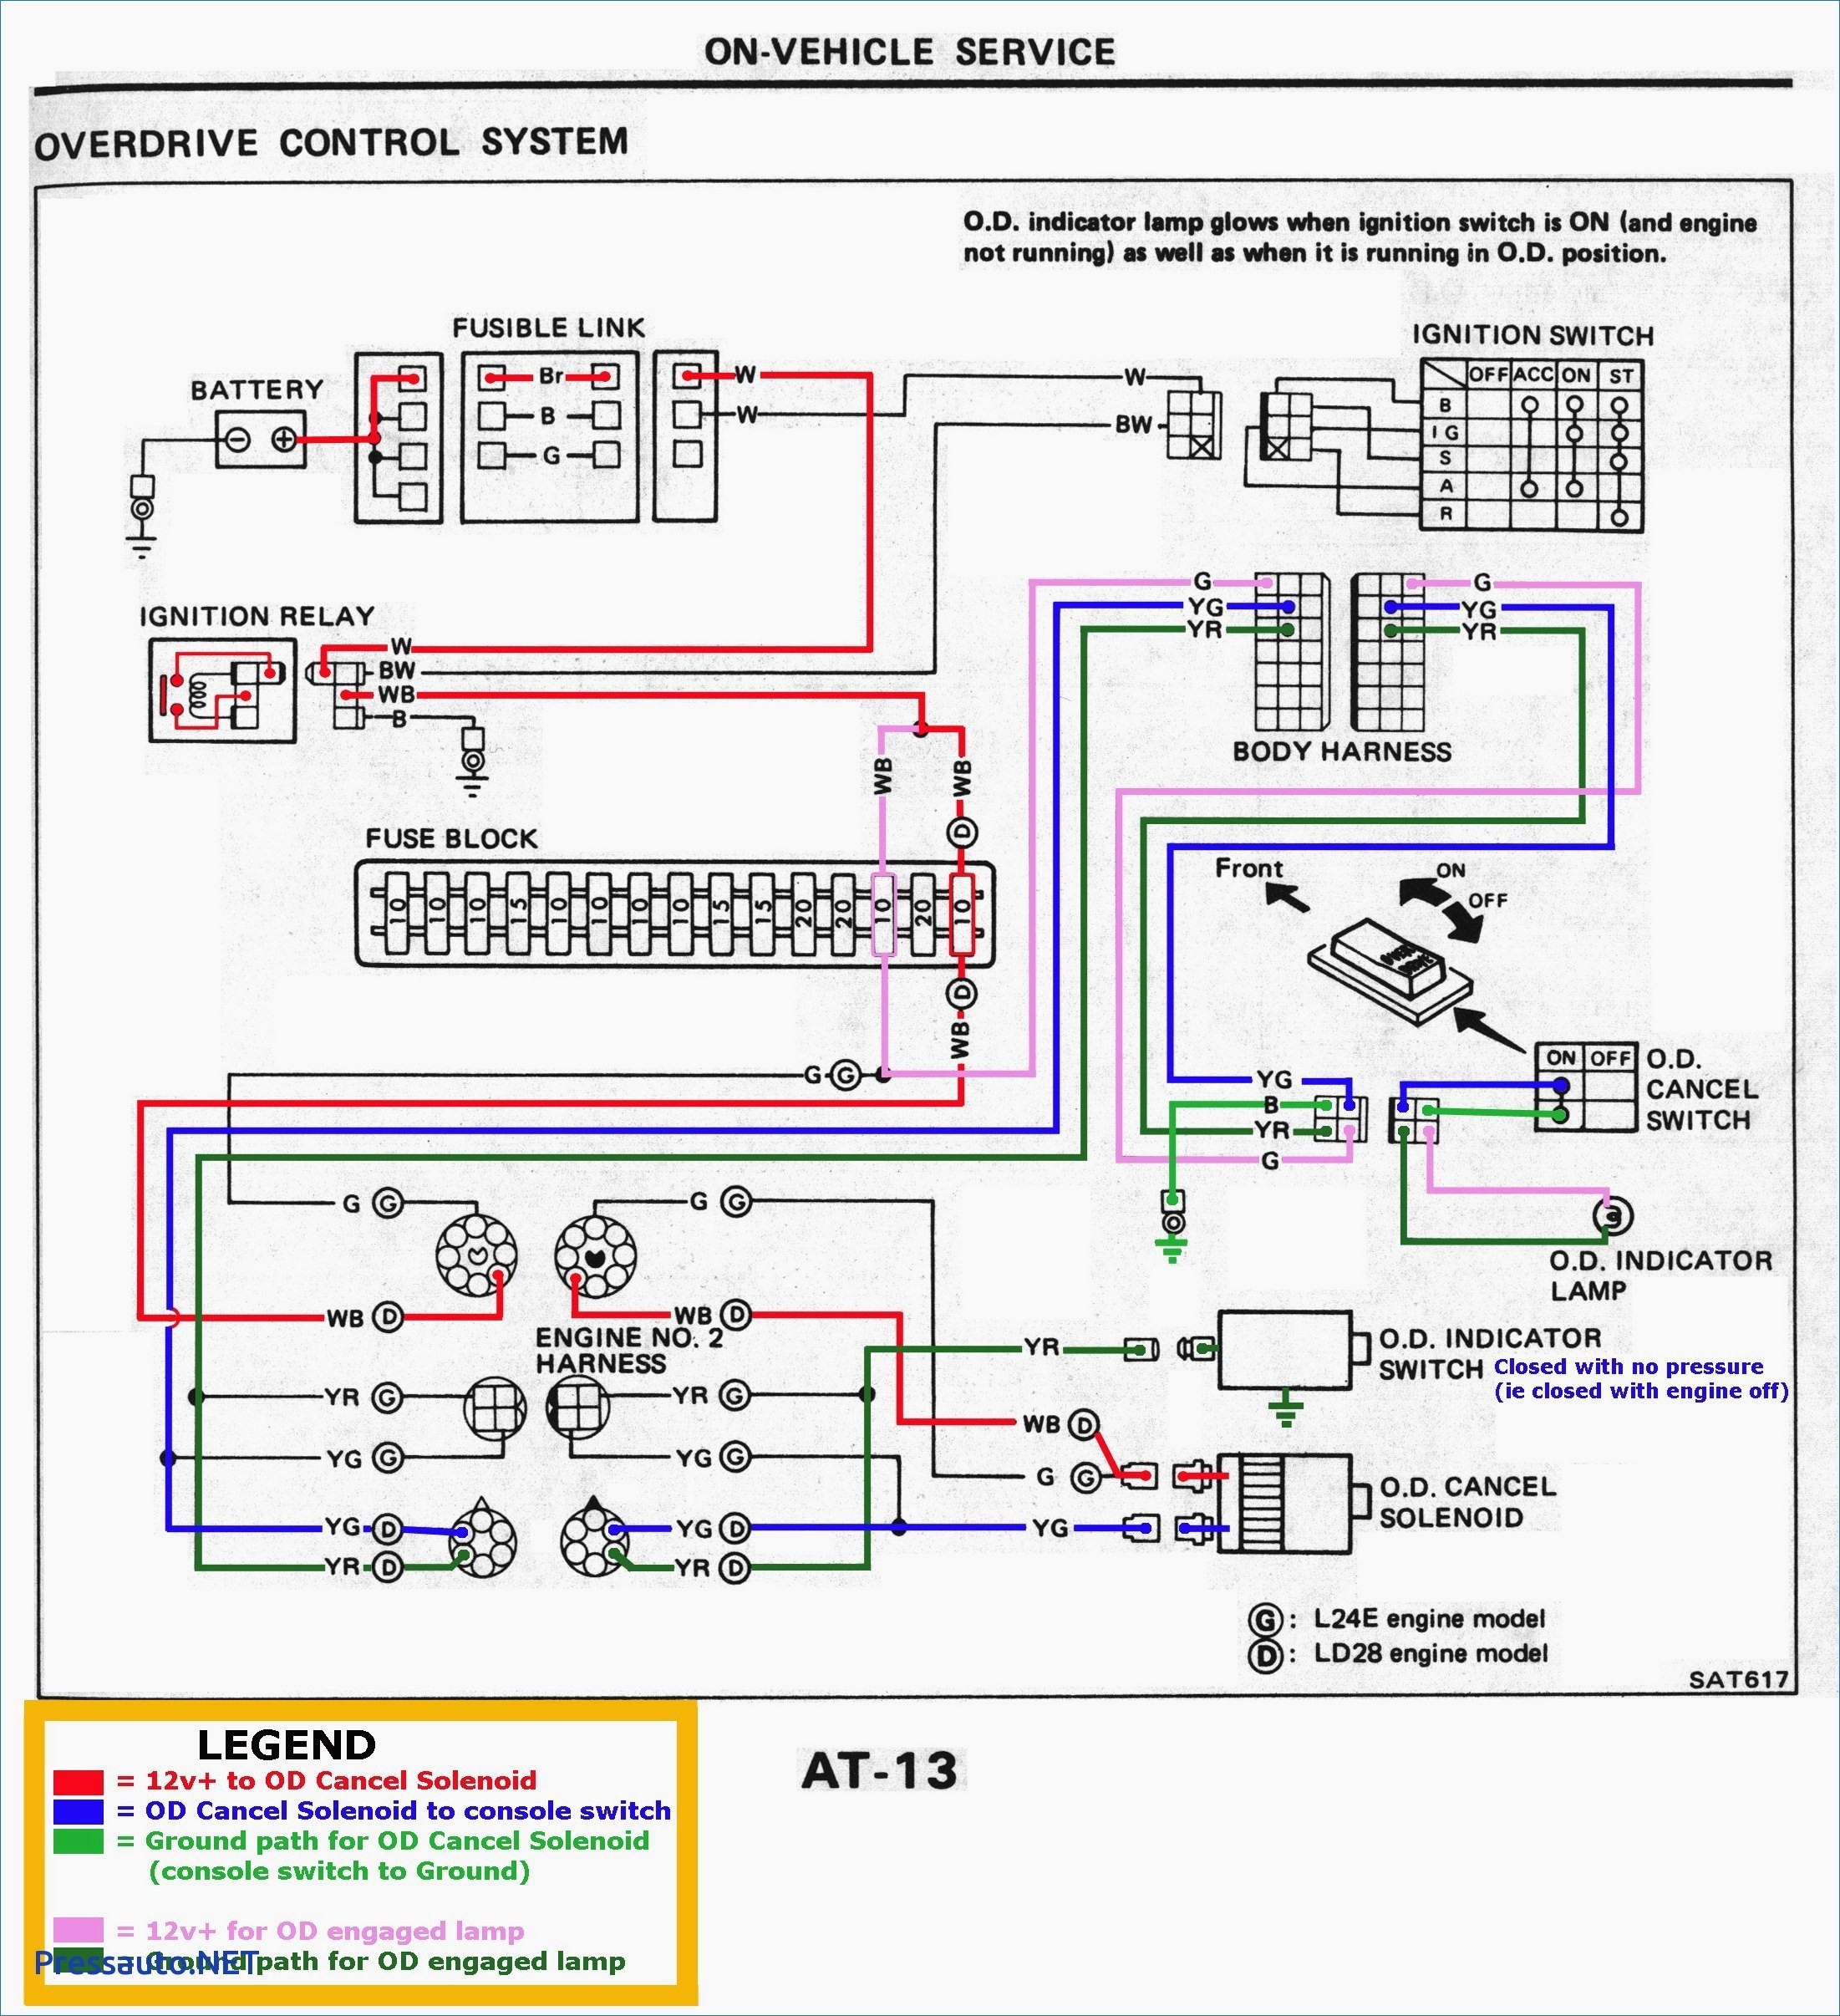 Mercedes Trailer Wiring Diagram Valid Mercedes Benz Wiring Diagrams Free Auto Electrical Wiring Diagram •